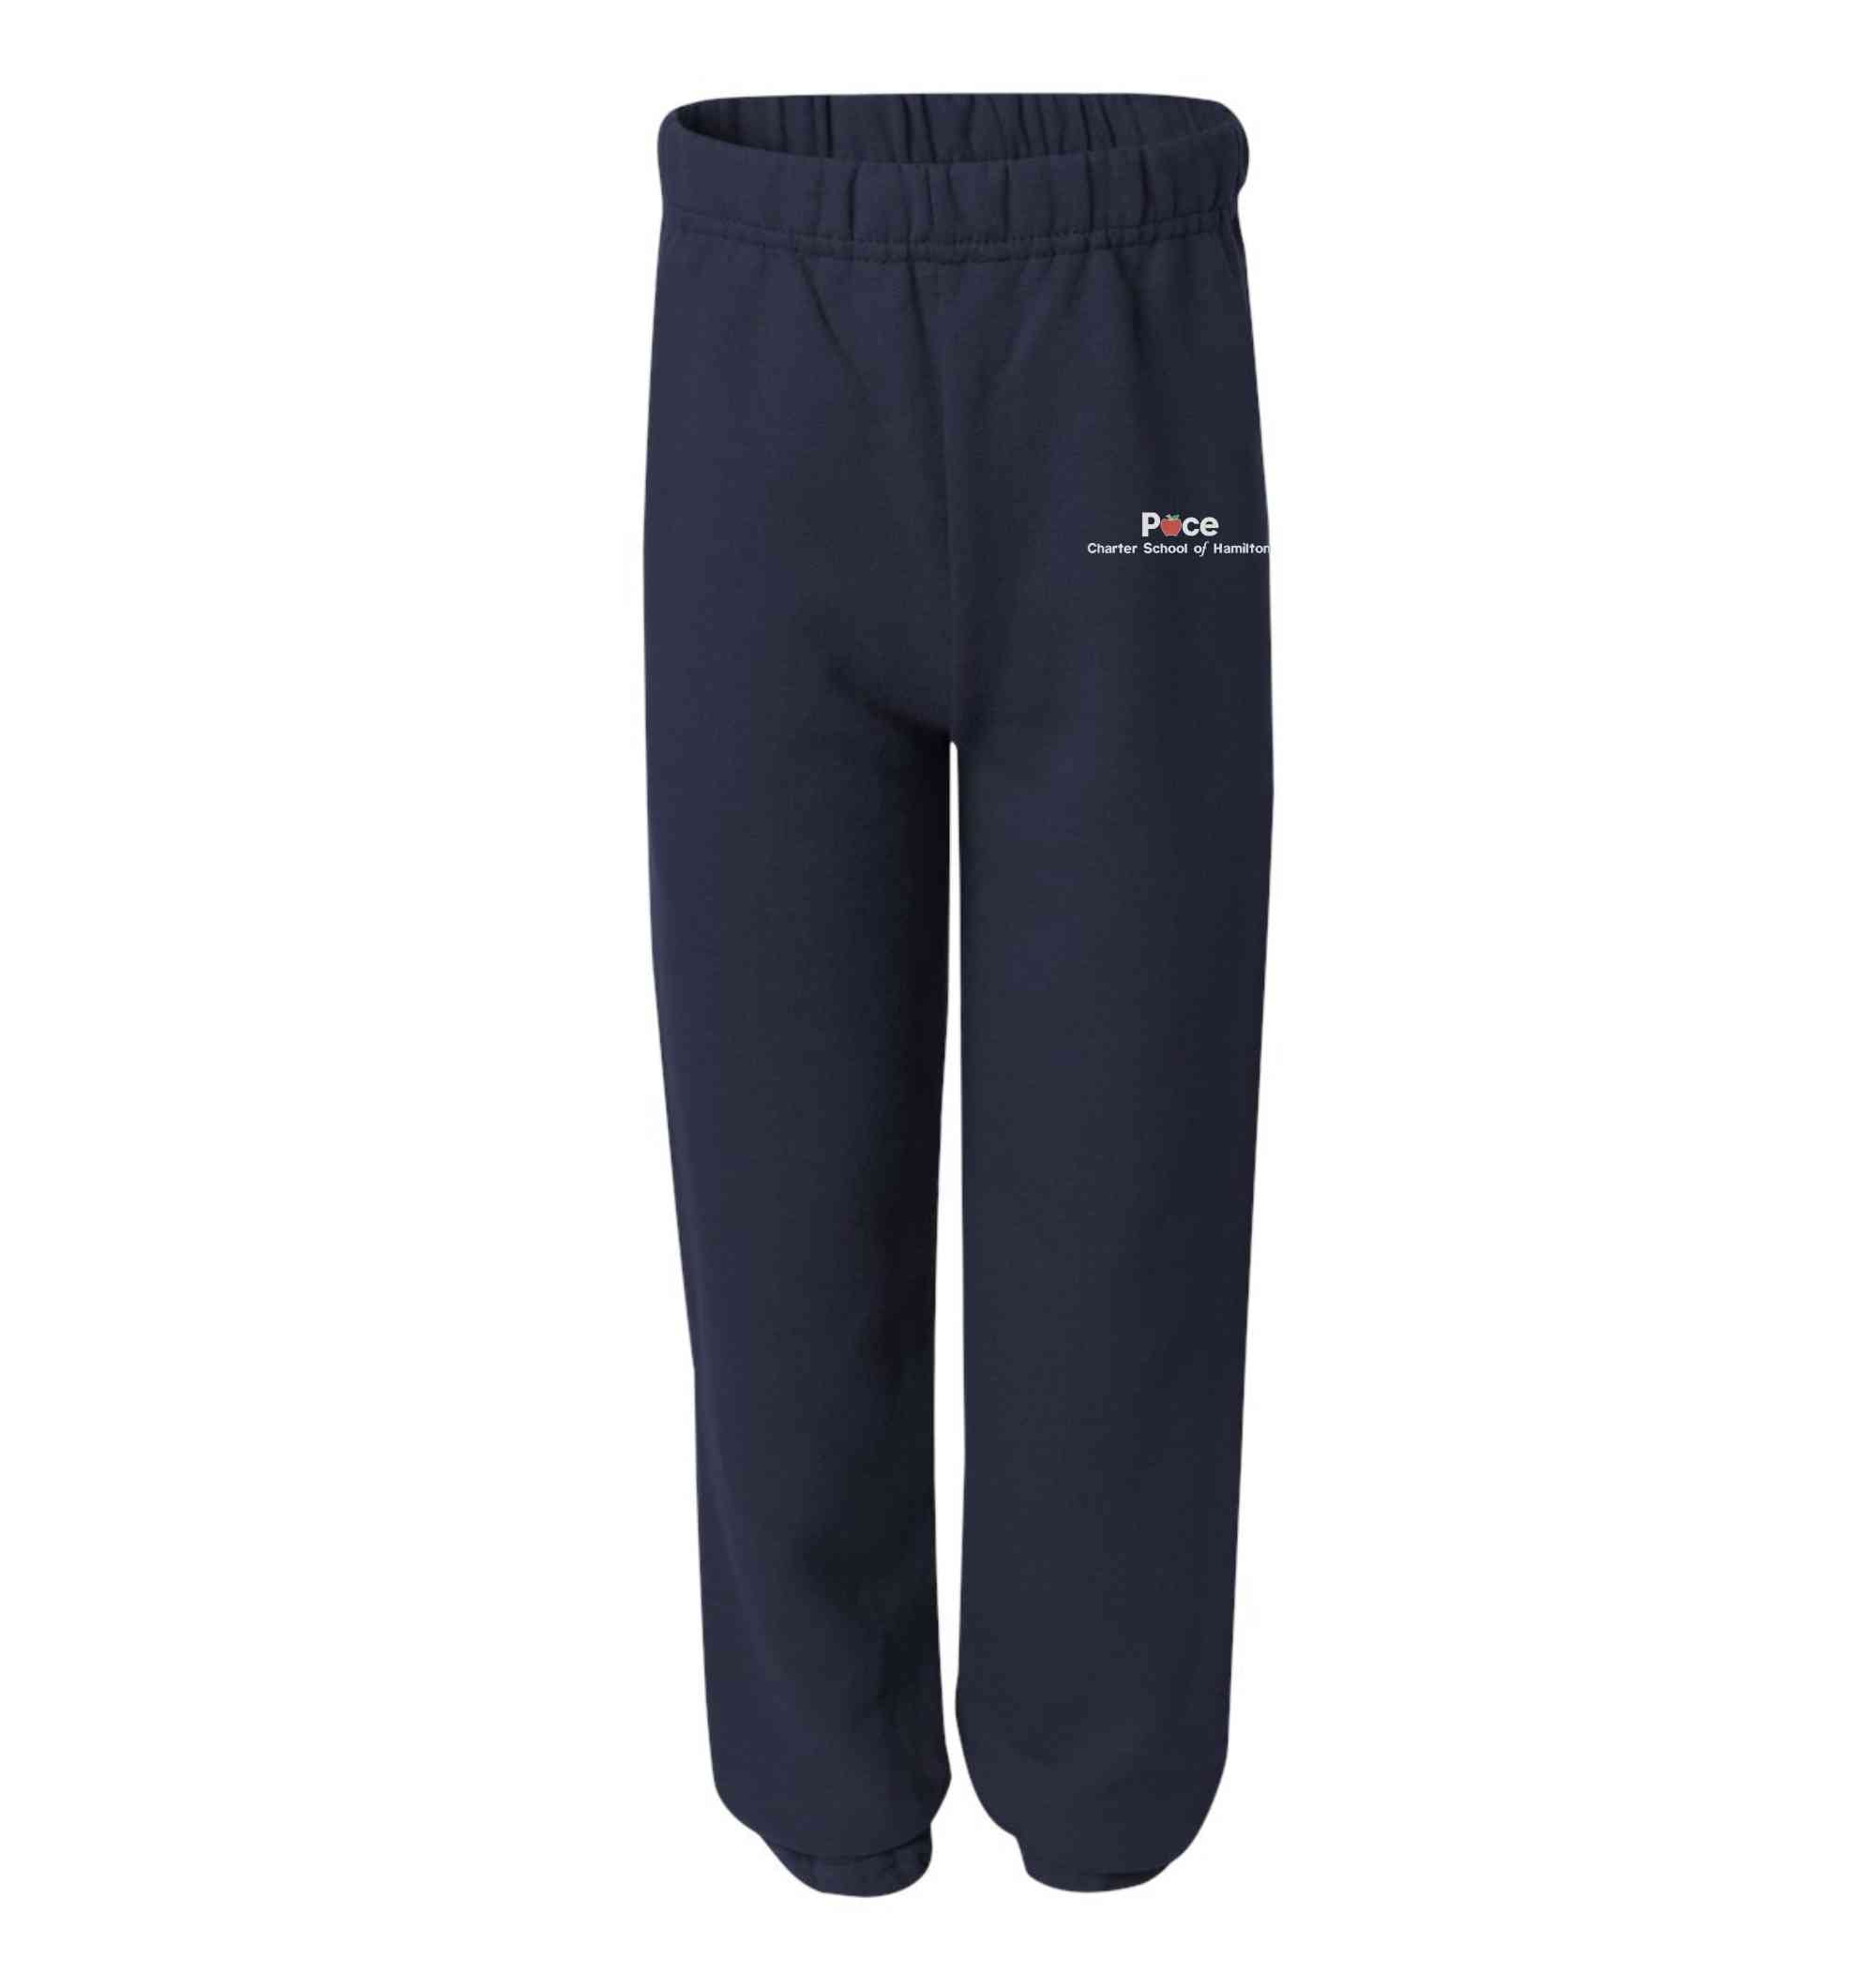 2c-18200 Gym Sweatpants - Embroidered Unisex Youth/Adult Sweatpants